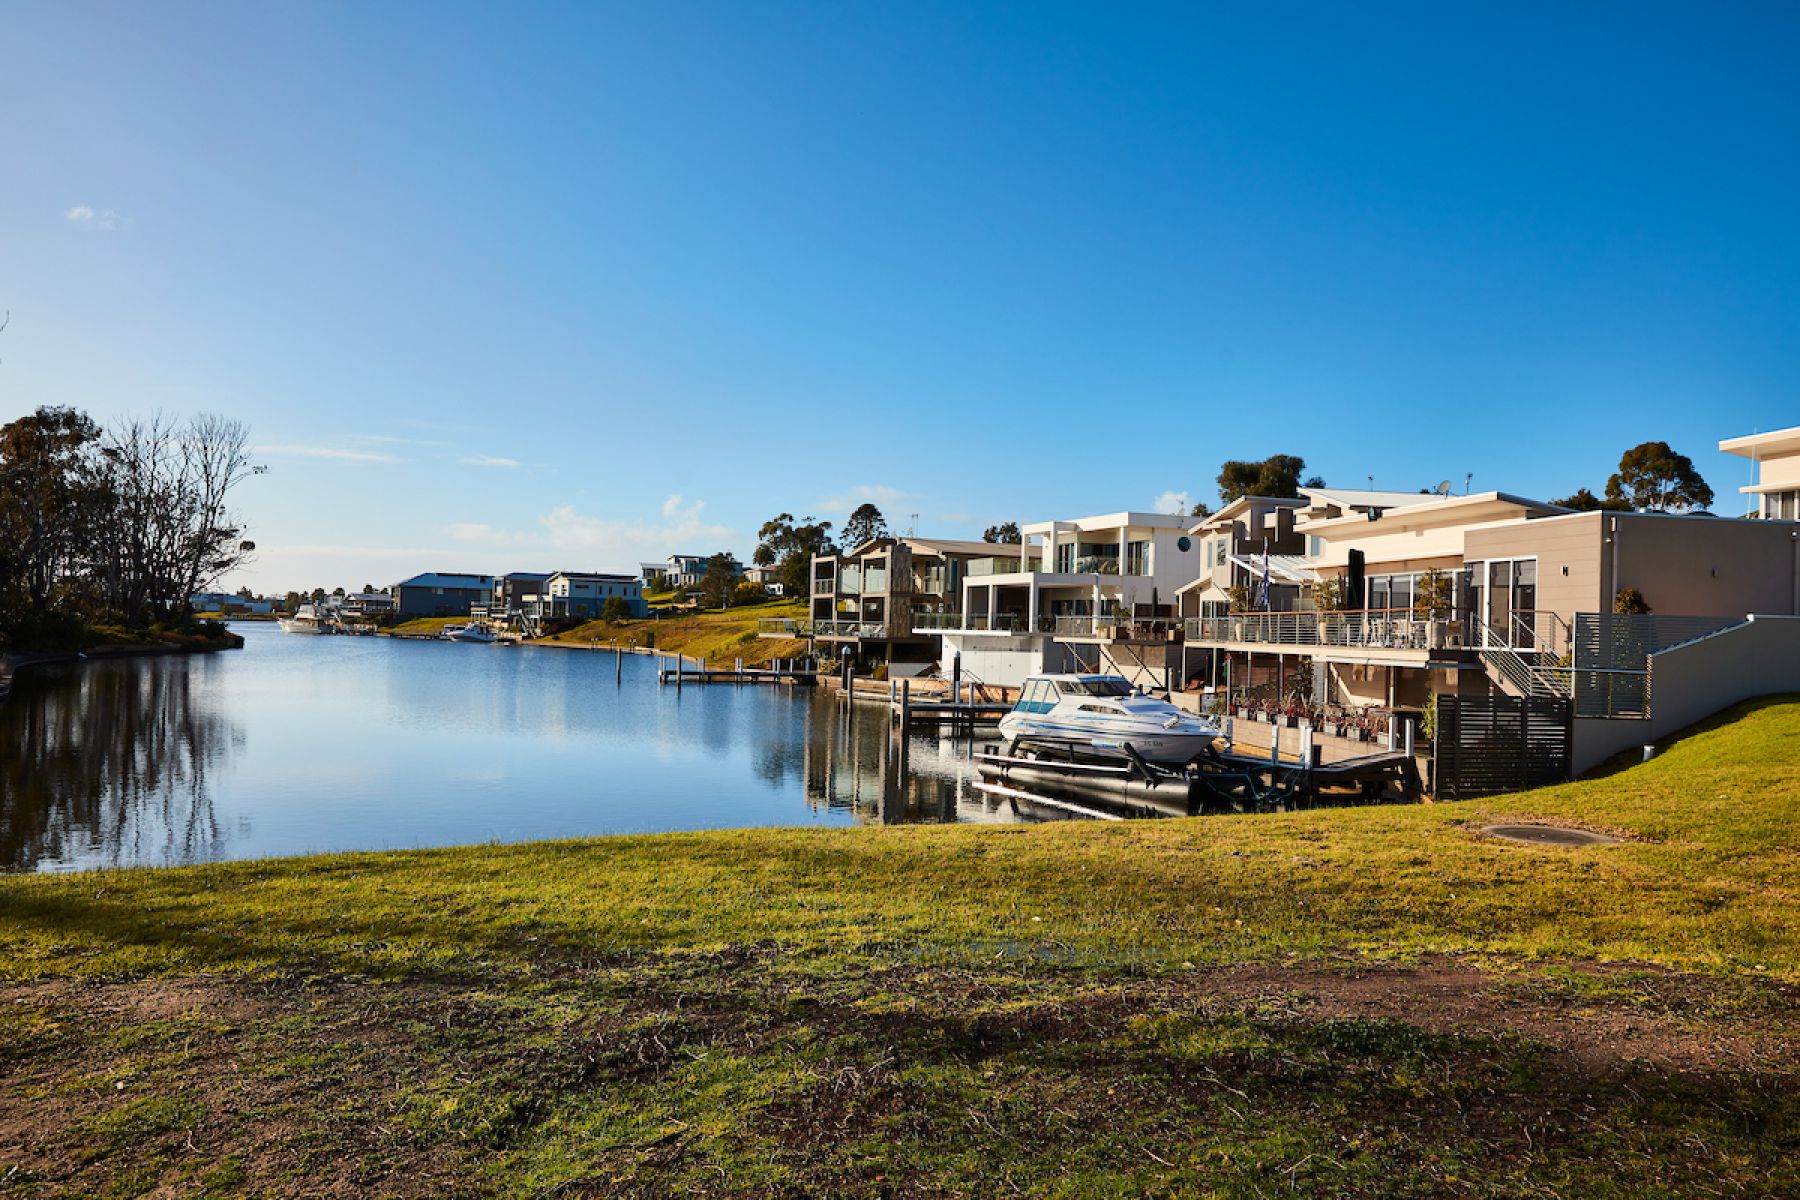 An image of the Gippsland Lakes showing a flat body of water with houses and docks in the background on a sunny day